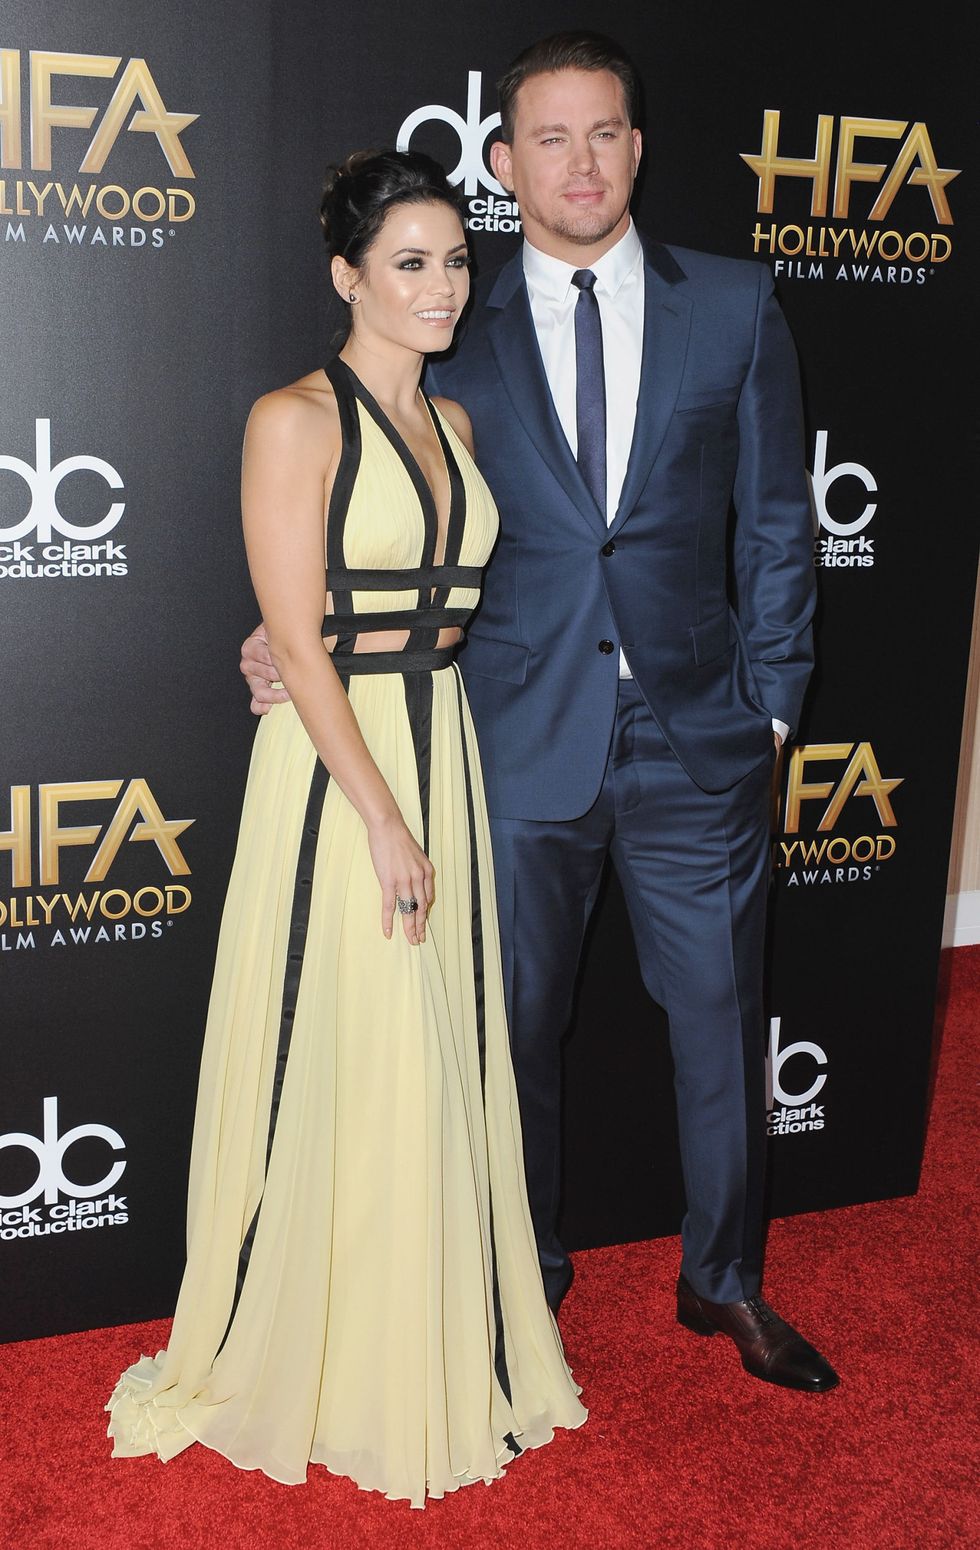 Celebrities on the red carpet at the Hollywood Film Awards 2015